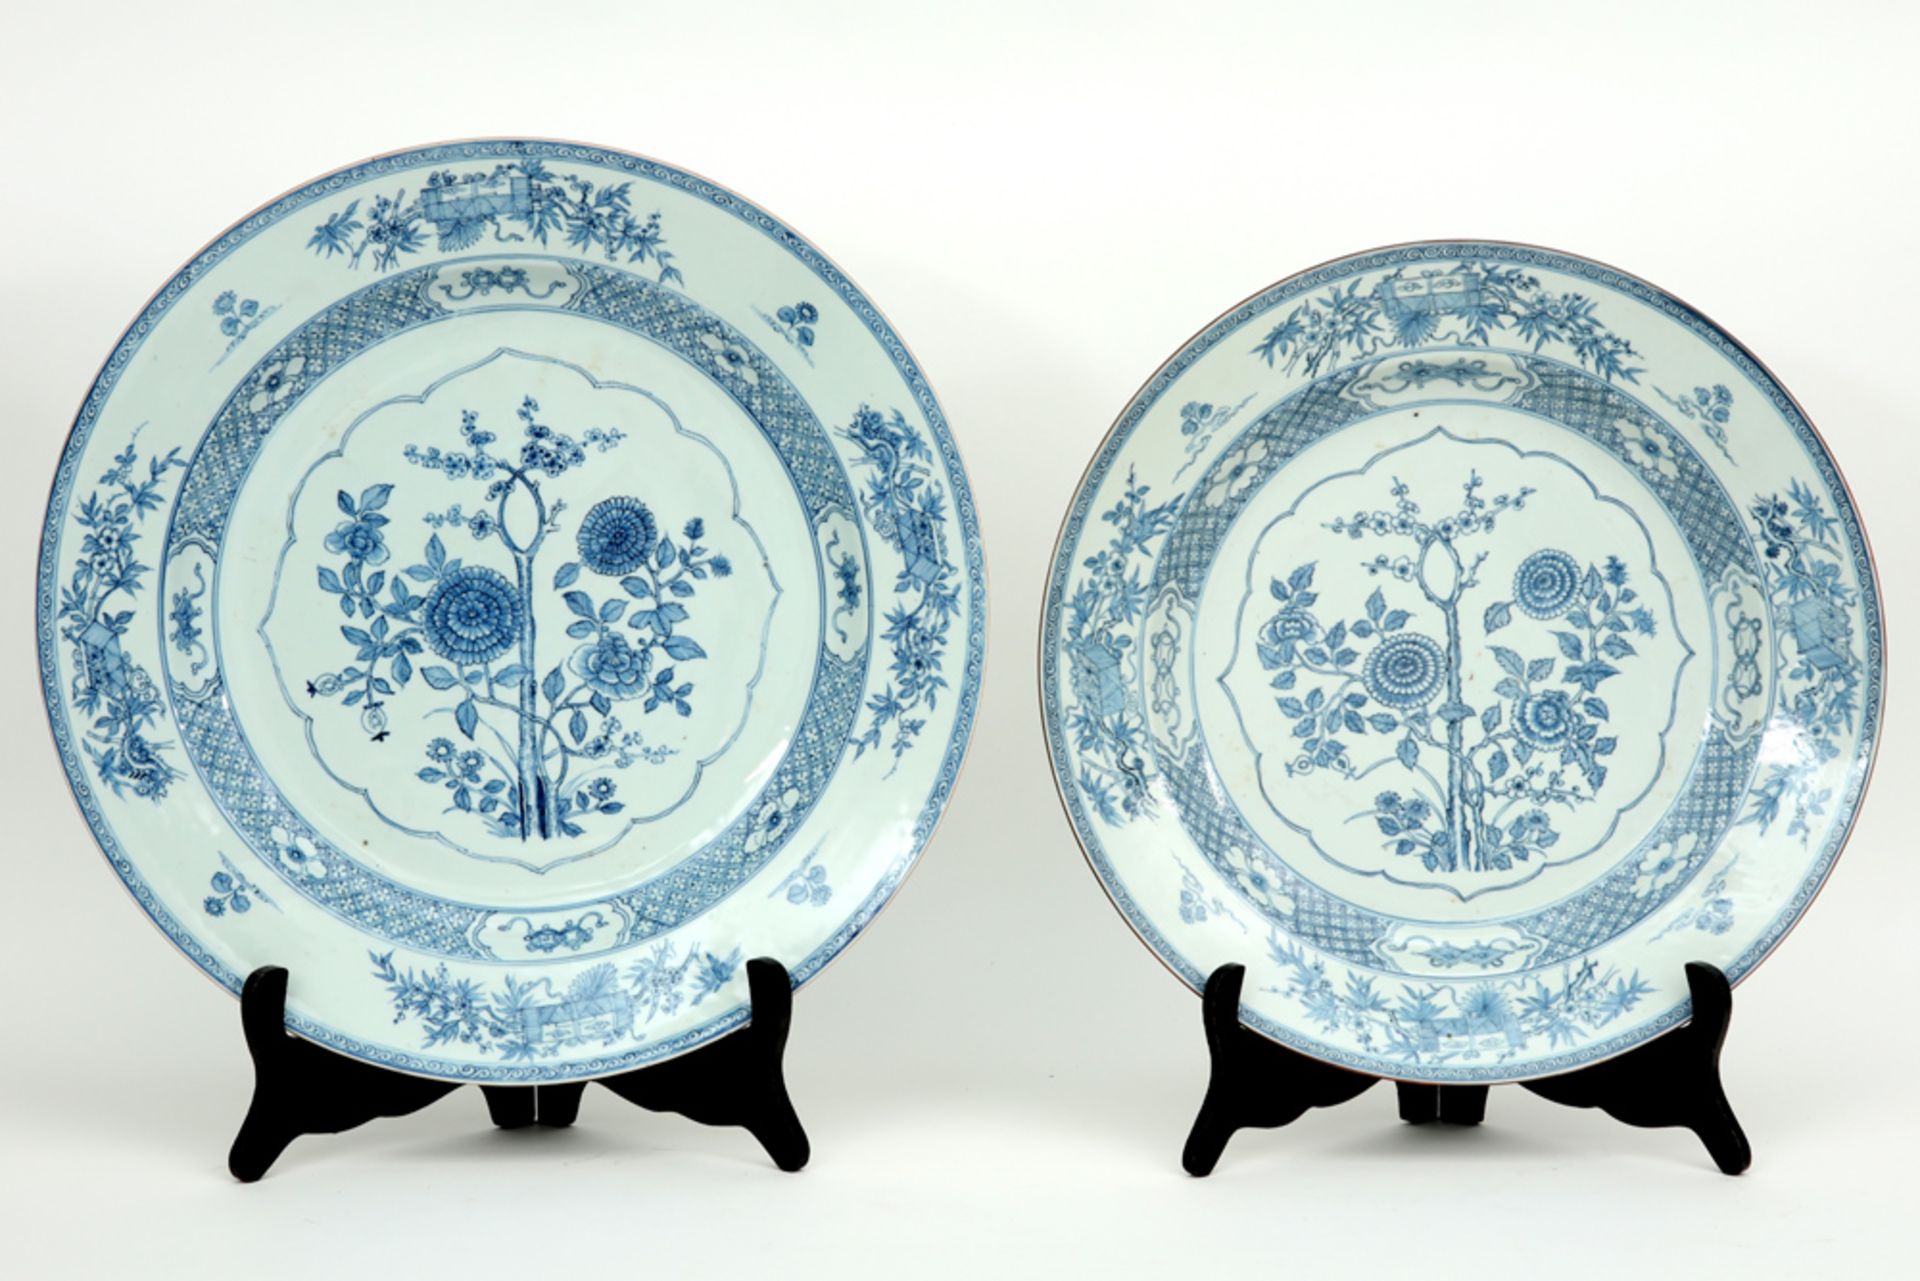 set of a bigger and a smaller 18th Cent. Chinese dish in porcelain with a quite special blue-white